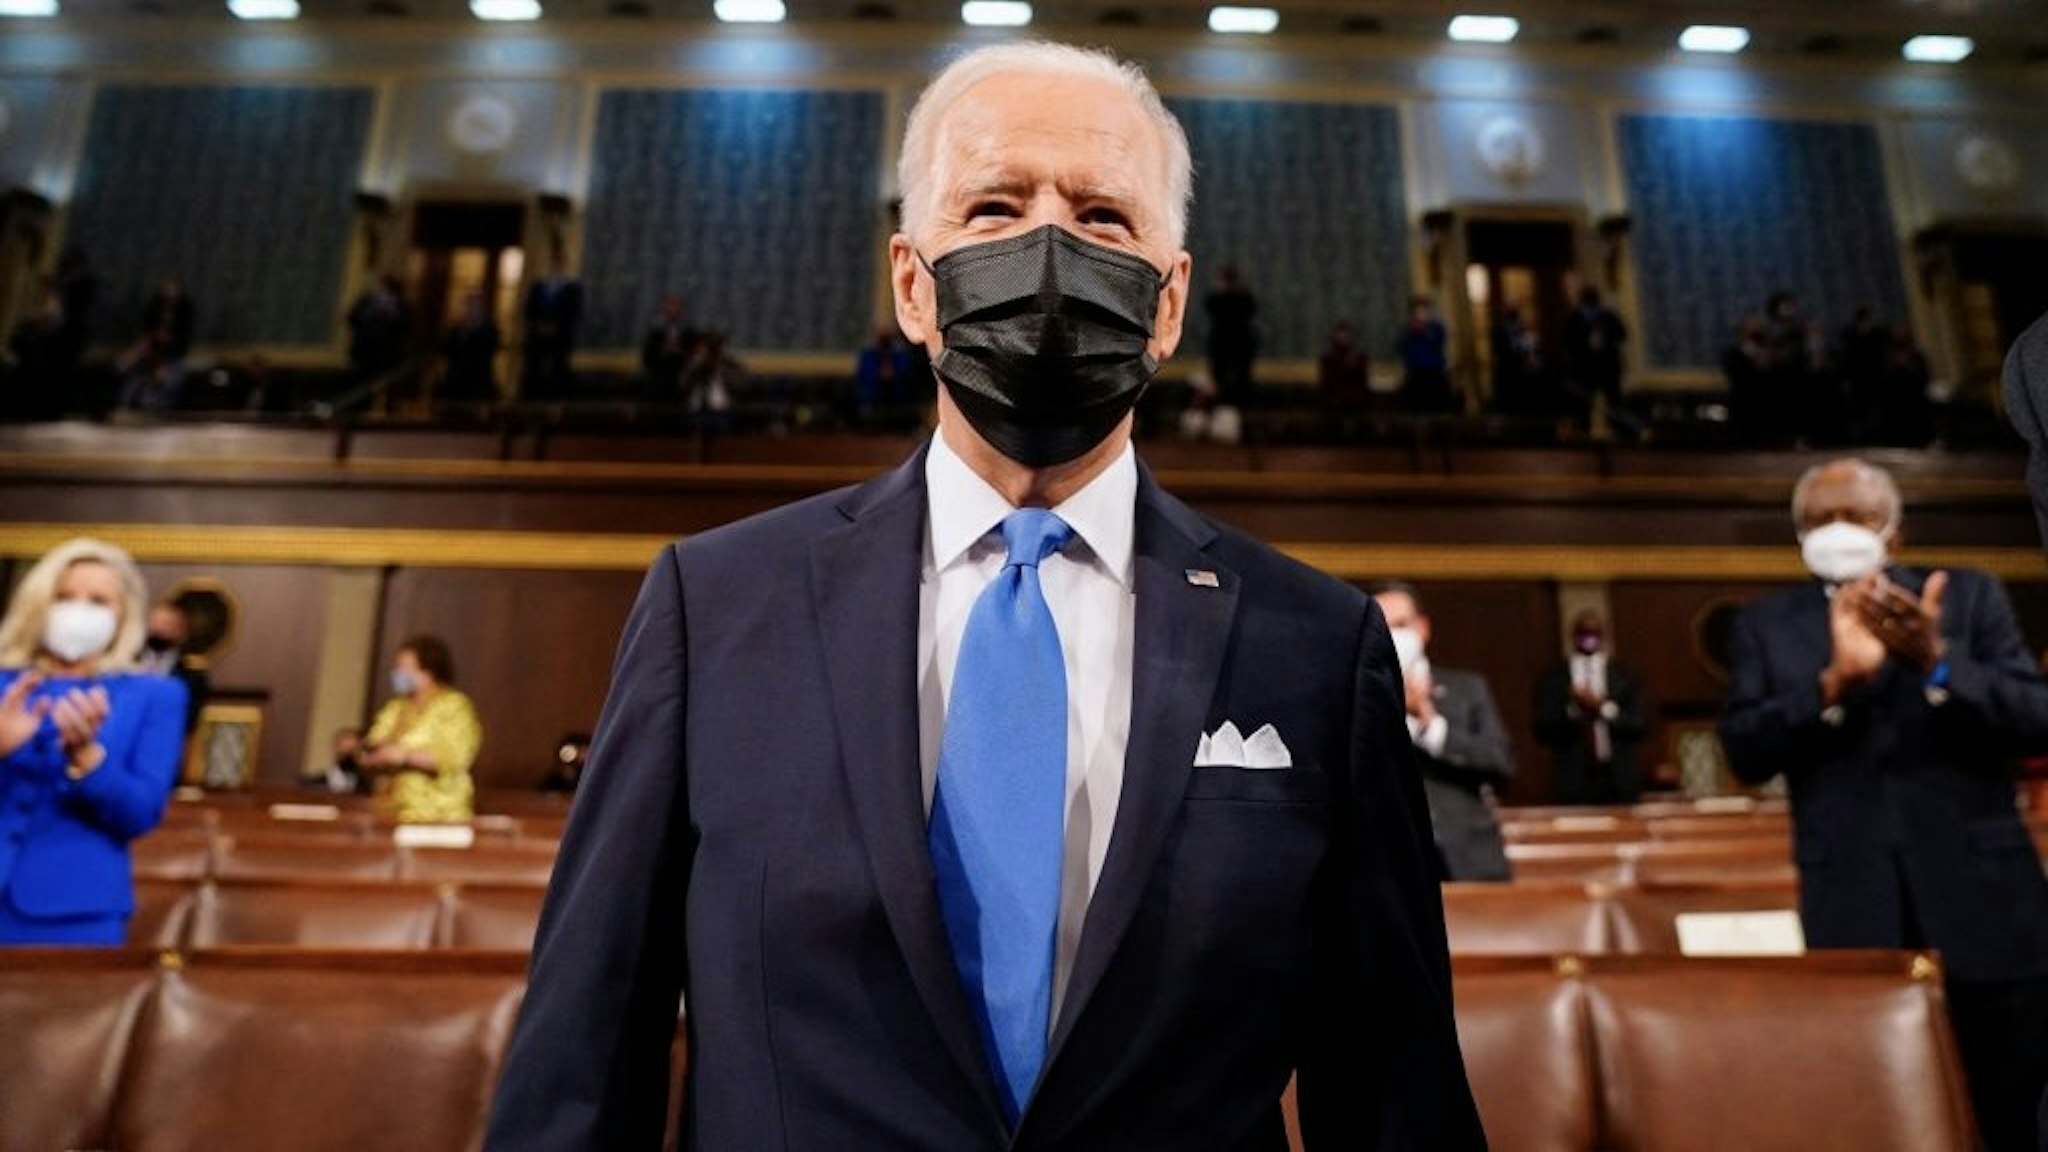 US-POLITICS-BIDEN US President Joe Biden arrives to address a joint session of Congress at the US Capitol in Washington, DC, on April 28, 2021. (Photo by Melina Mara / POOL / AFP) (Photo by MELINA MARA/POOL/AFP via Getty Images)